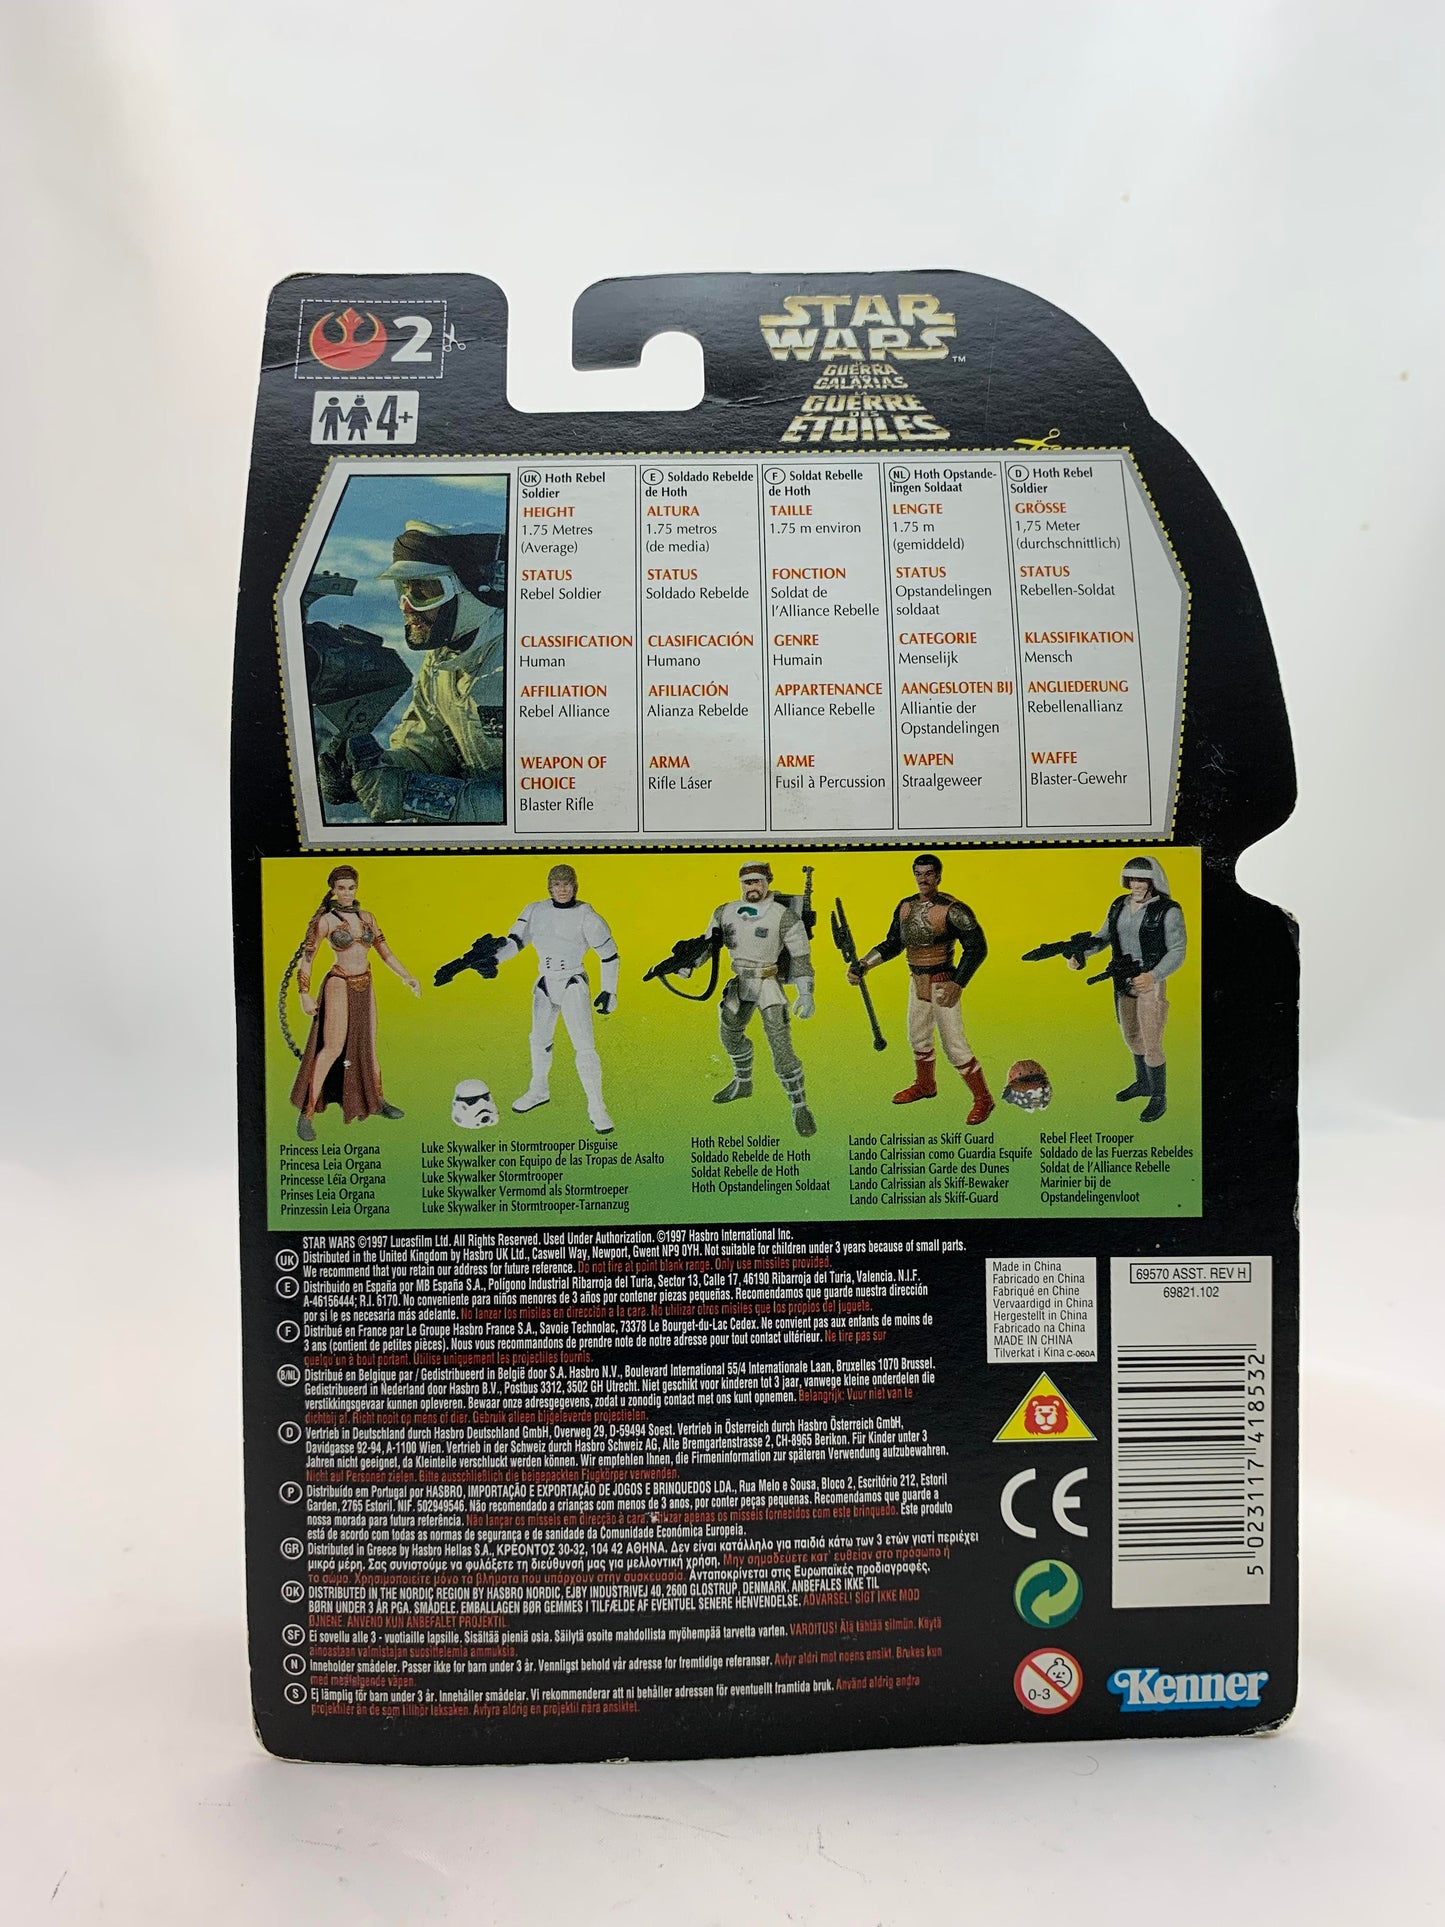 Kenner Hasbro Star Wars Power Of The Force 2 Tri Logo Green Card HOLOGRAM Hoth Rebel Soldier with Survival Backpack and Blaster Rifle 1998 - MOC